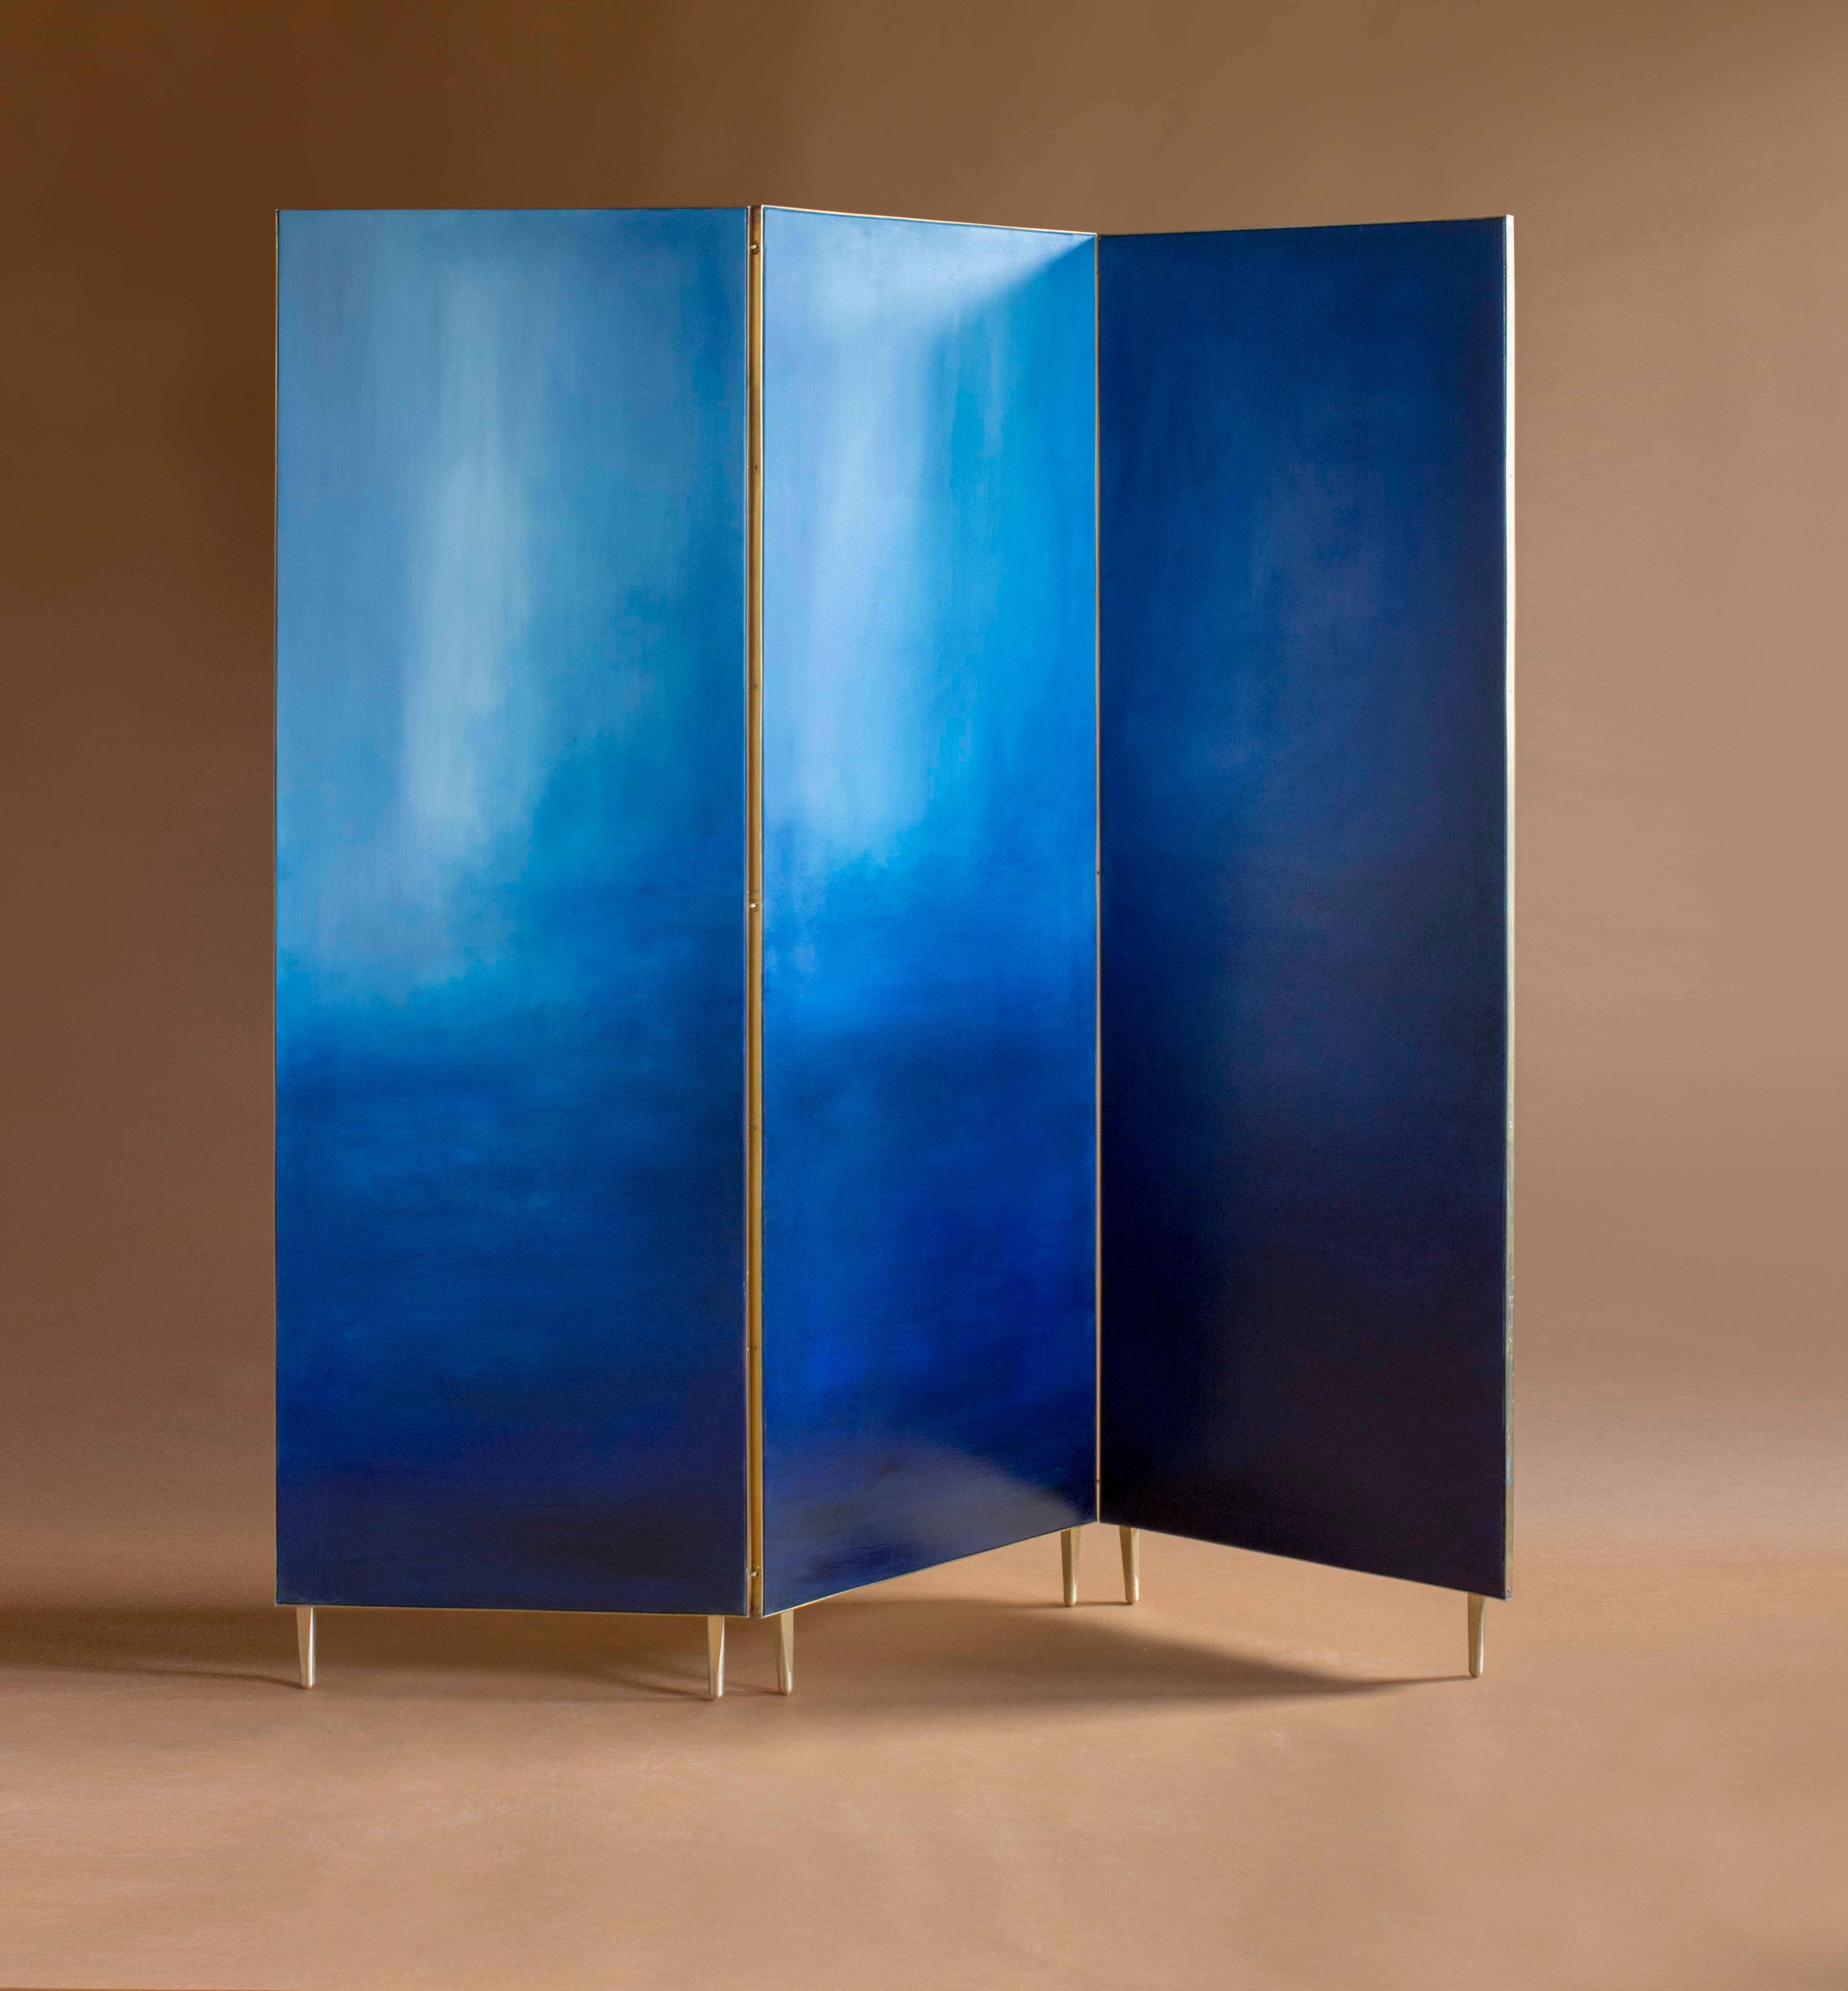 Hand Painted Screen, Jan Garncarek and Ewelina Makosa
Each screen is unique and signed by Jan Garncarek and Ewelina Makosa
Full brass frame. Hand painted on both sides of the screen.
Dimensions: 180 x 2.5 x 190 cm
Weight:20 kg

Hand painted cloth in